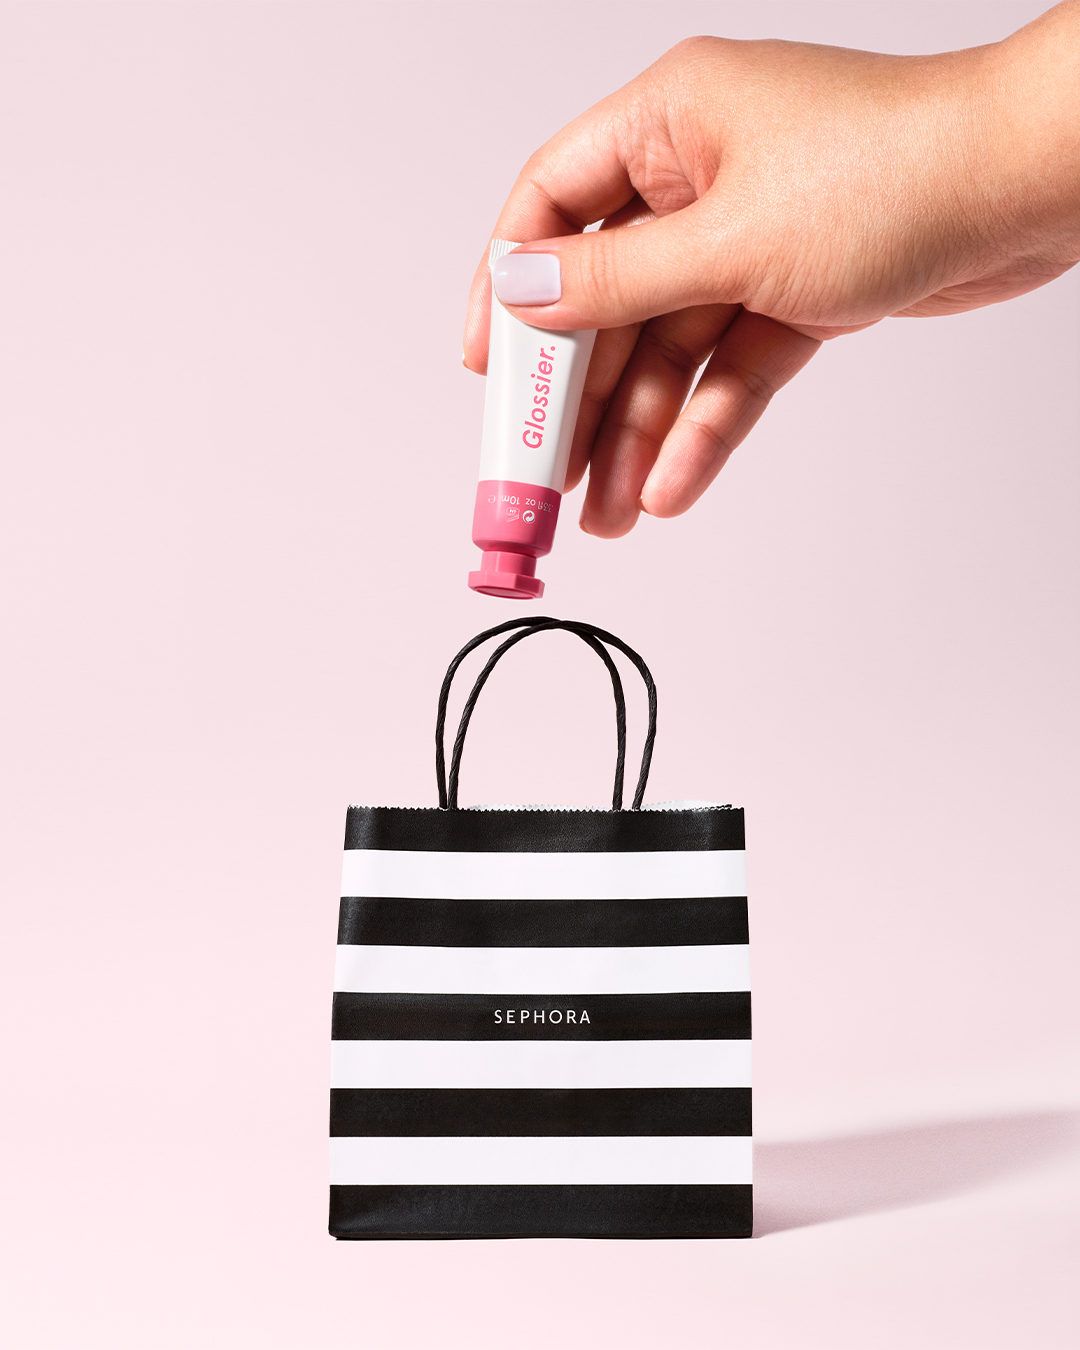 Sephora Canvas Tote Bag Black - $14 (53% Off Retail) - From Arianna